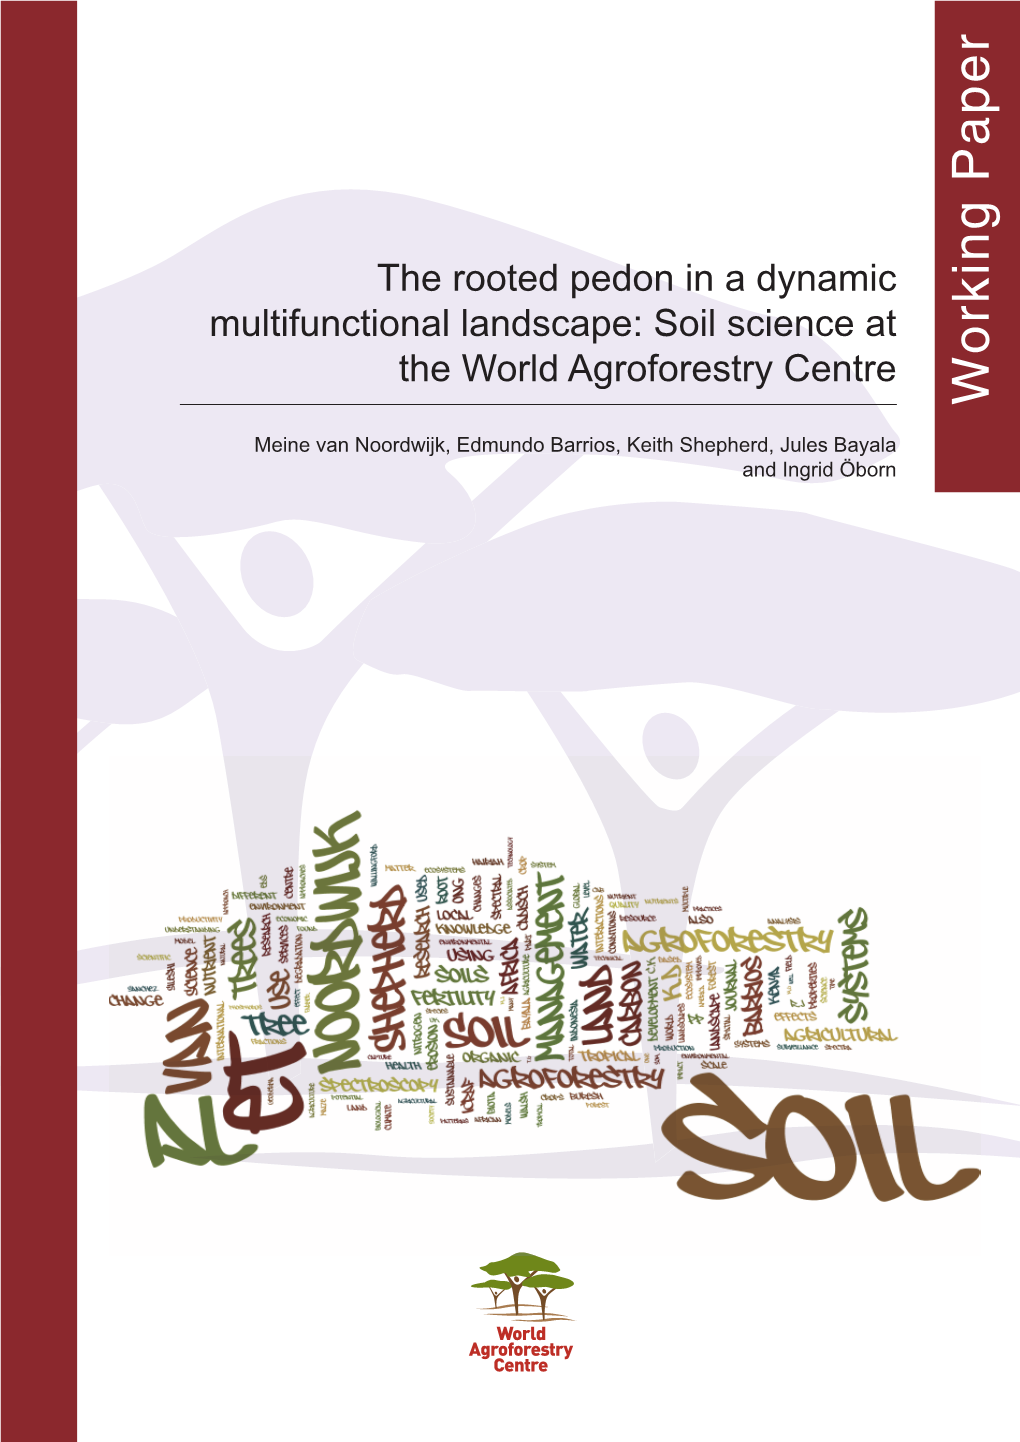 The Rooted Pedon in a Dynamic Multifunctional Landscape: Soil Science at the World Agroforestry Centre